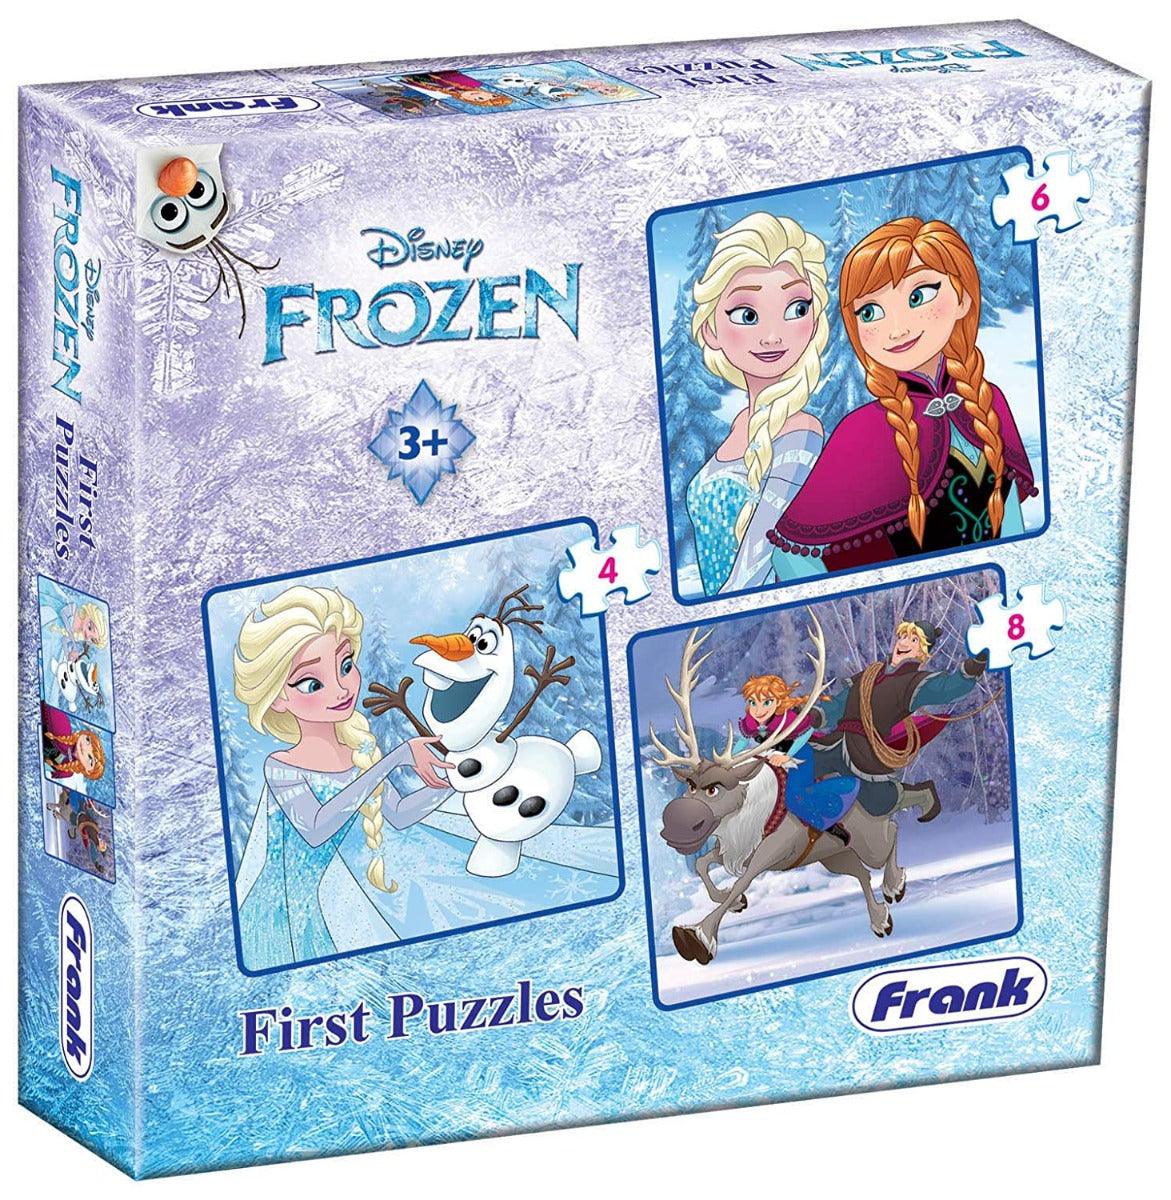 Frank Disney Frozen First Puzzles - A Set of 3 Jigsaw Puzzles for 3 Year Old Kids and Above